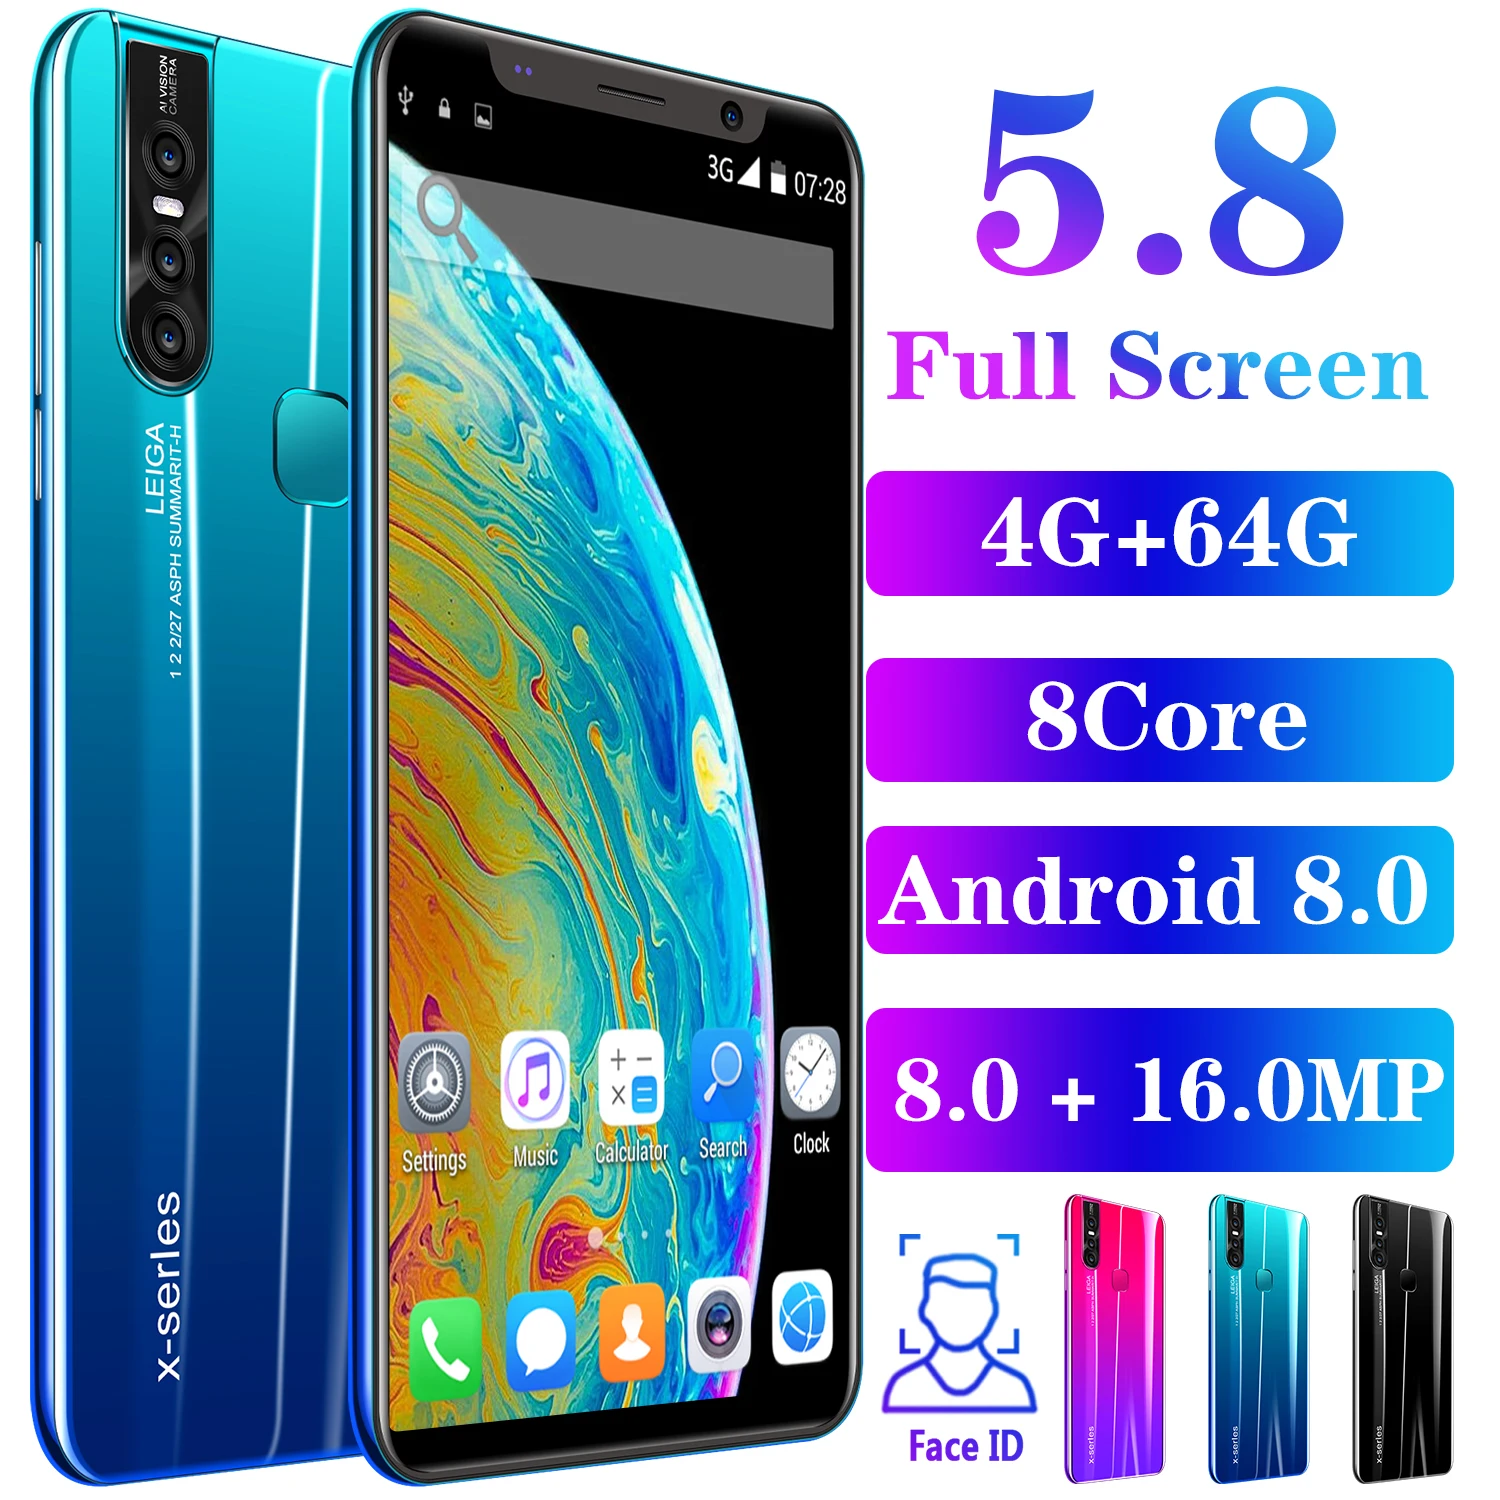 

X27 Plus Smartphone 4G +64GB General-Purpose Large Straight Screen Quad-Core Dual Card Dual Standby Android phone, Blue/black/red